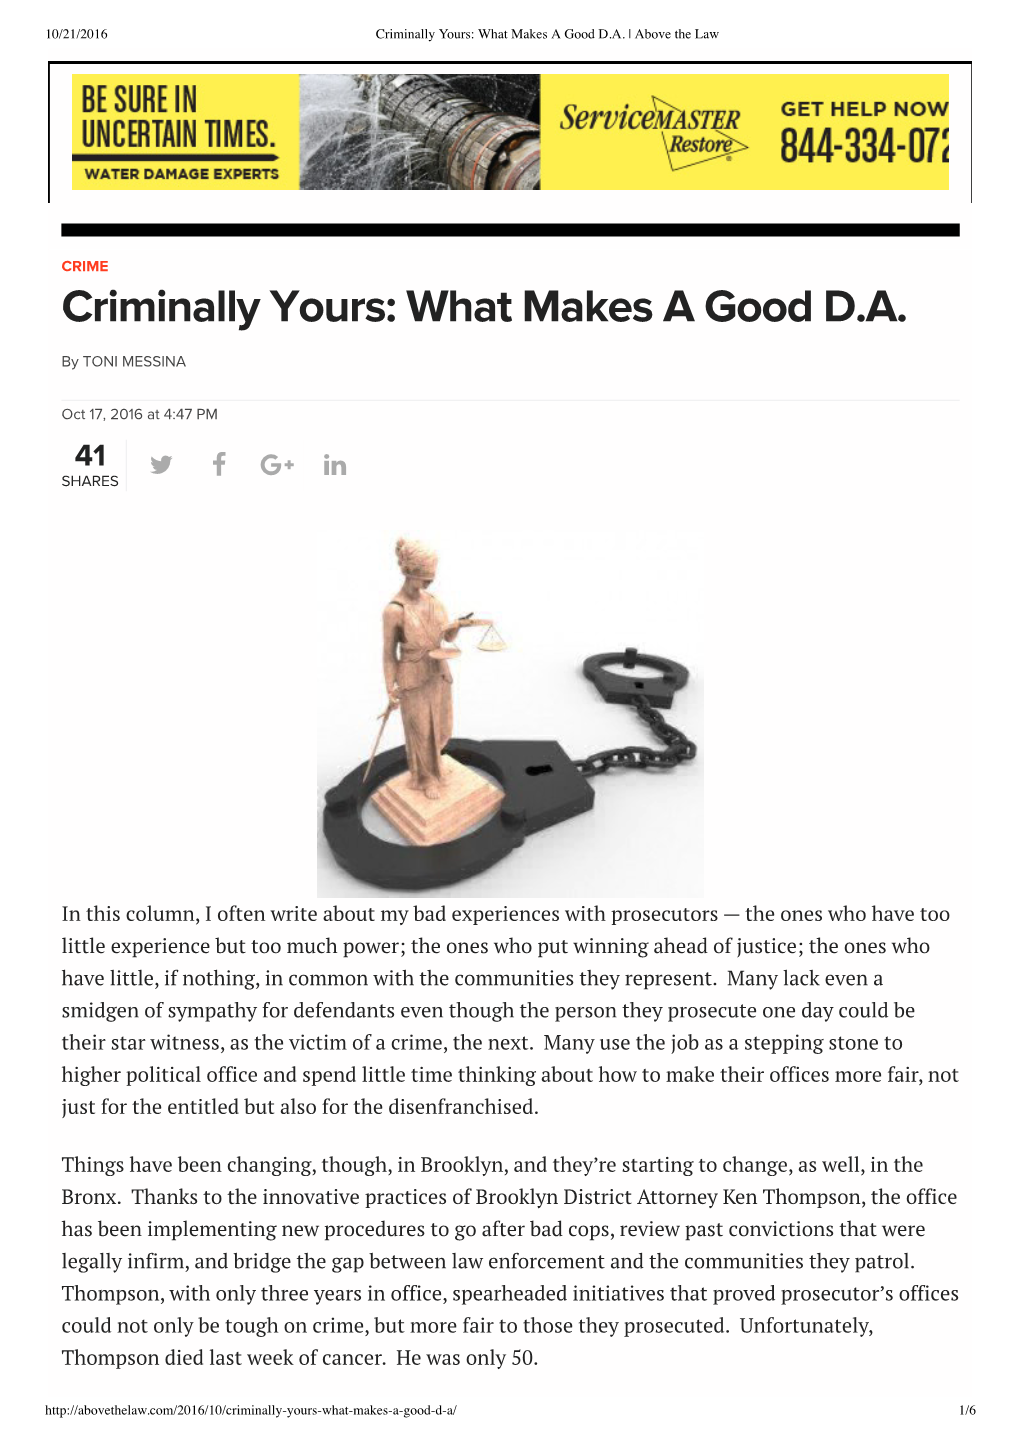 Criminally Yours: What Makes a Good D.A. | Above the Law